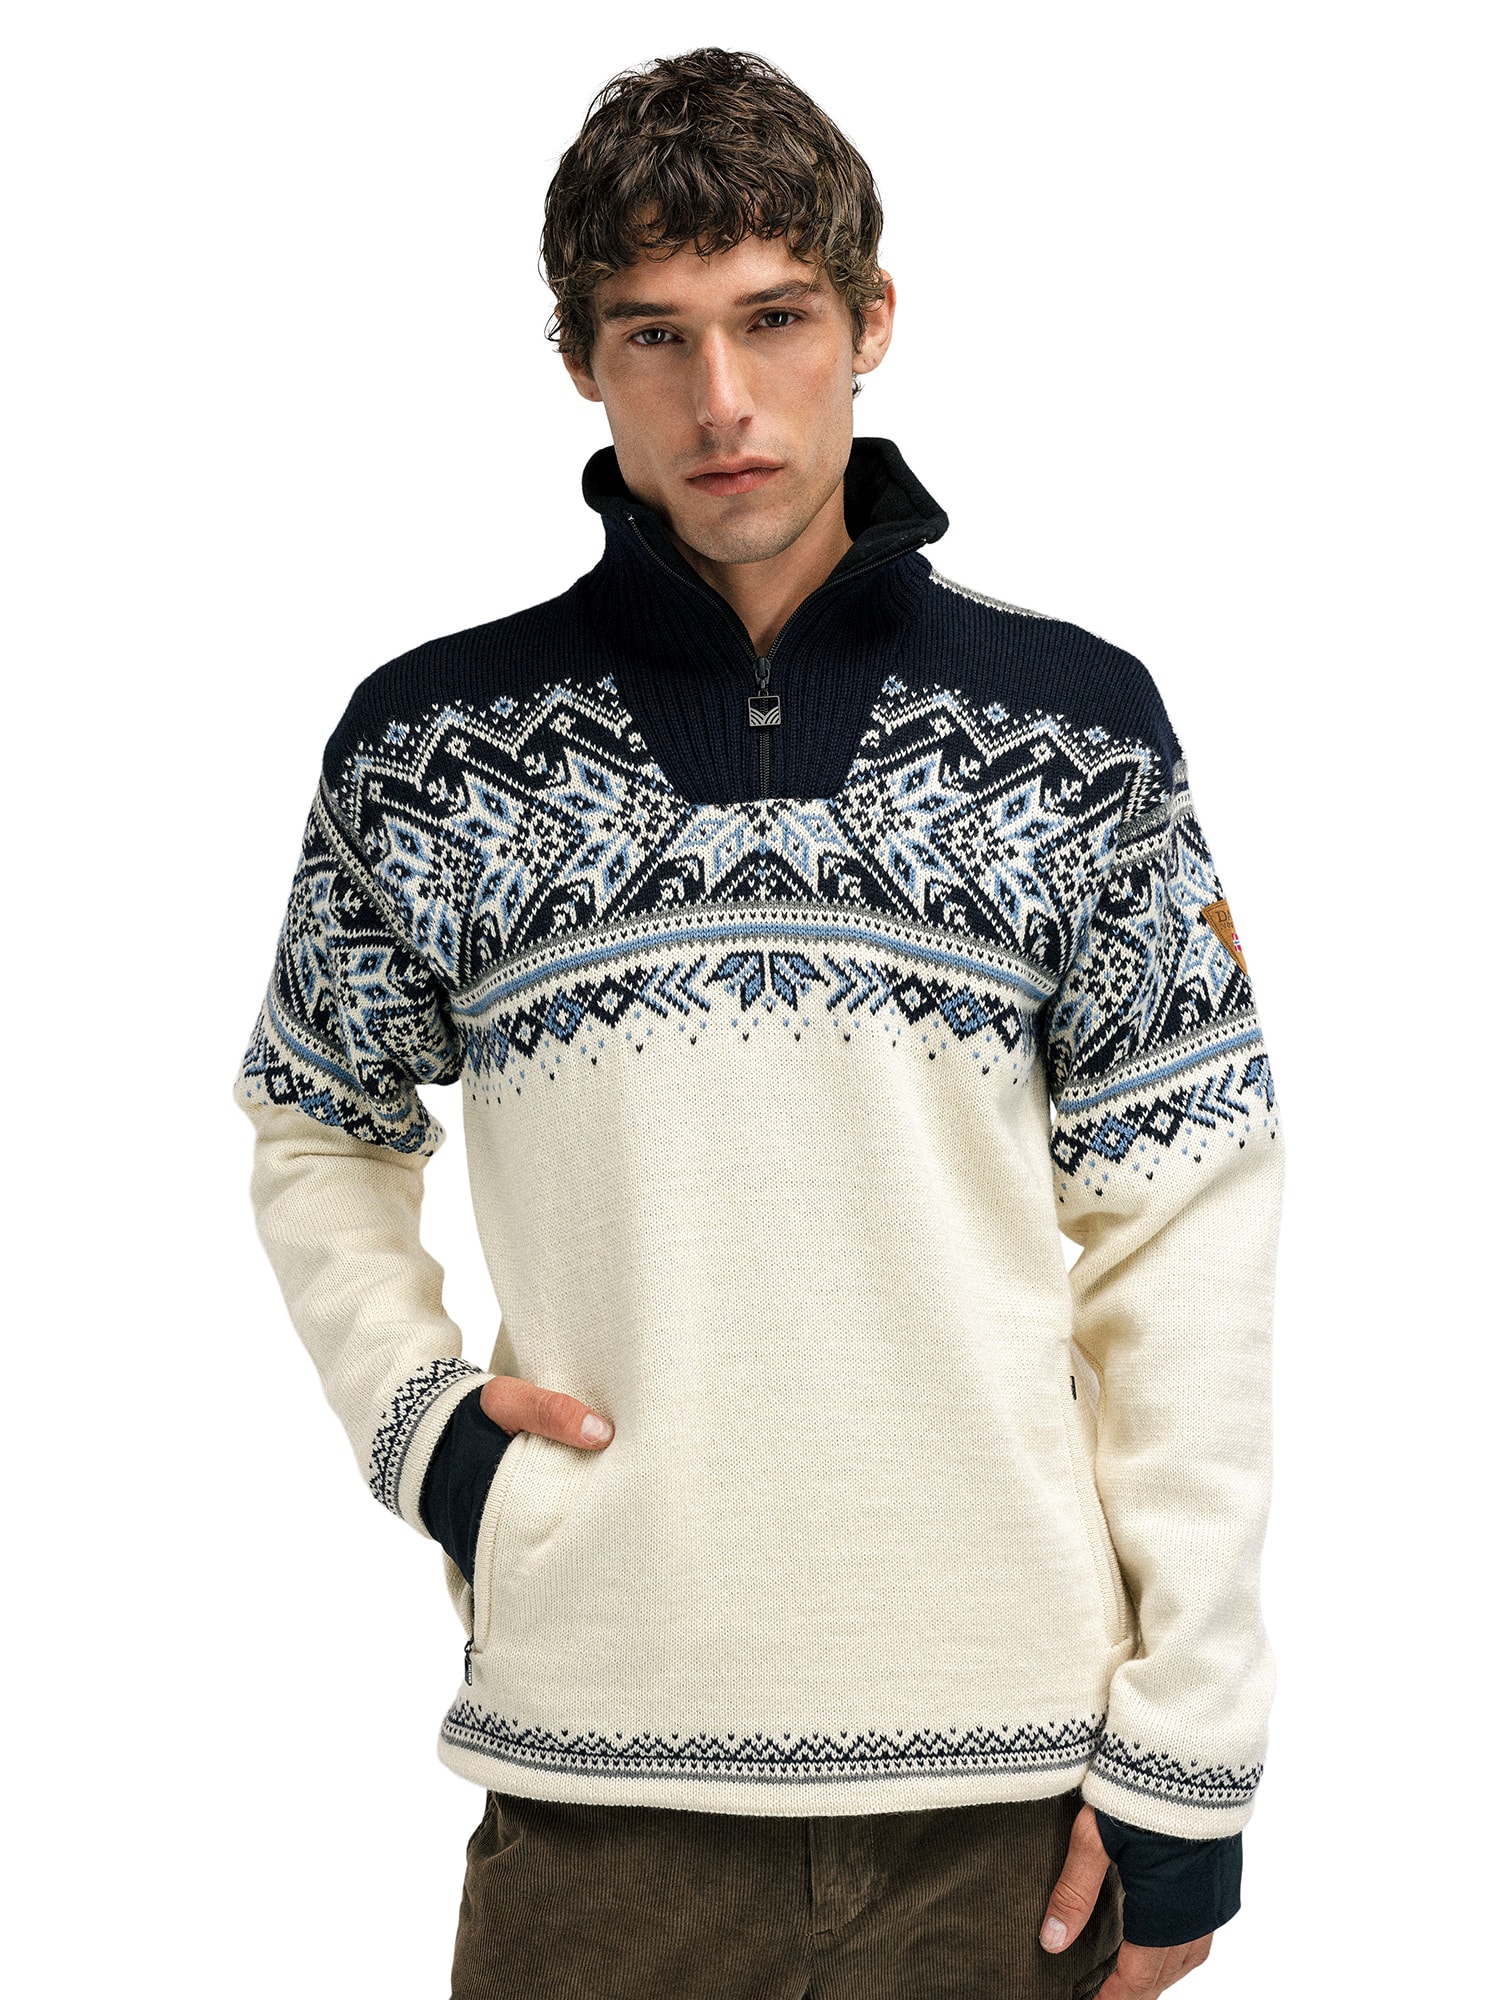 Vail Weatherproof Sweater - Men - Offwhite - Dale of Norway - Dale of Norway